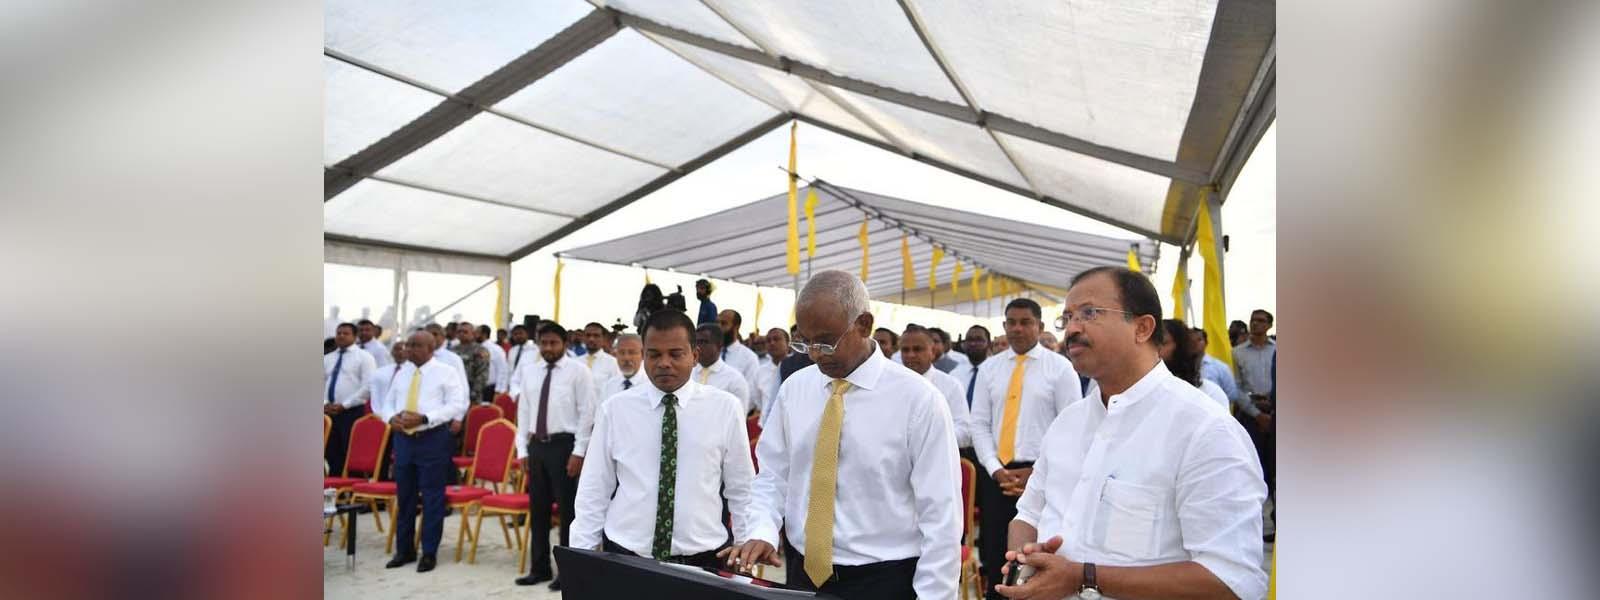 Minister of State for External Affairs Shri V. Muraleedharan witnessed the commencement of works of Addu Reclamation project along with President of Maldives H.E. Mr. Ibrahim Mohamed Solih